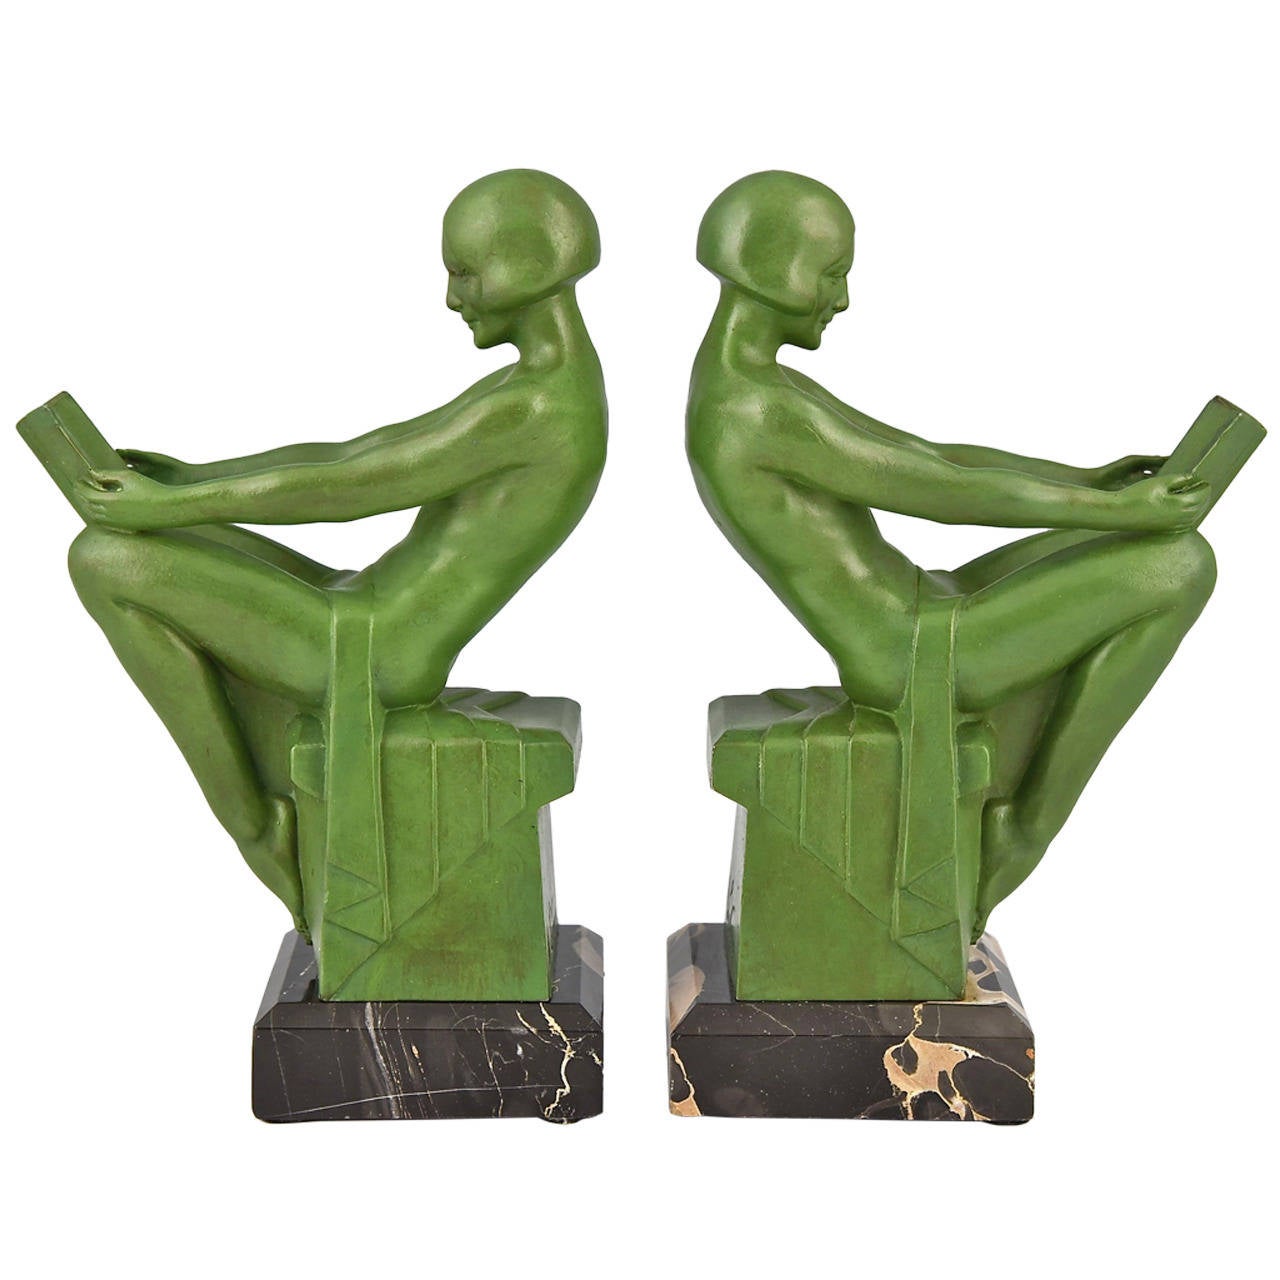 Art Deco Bookends Reading Nudes by Max Le Verrier 1930